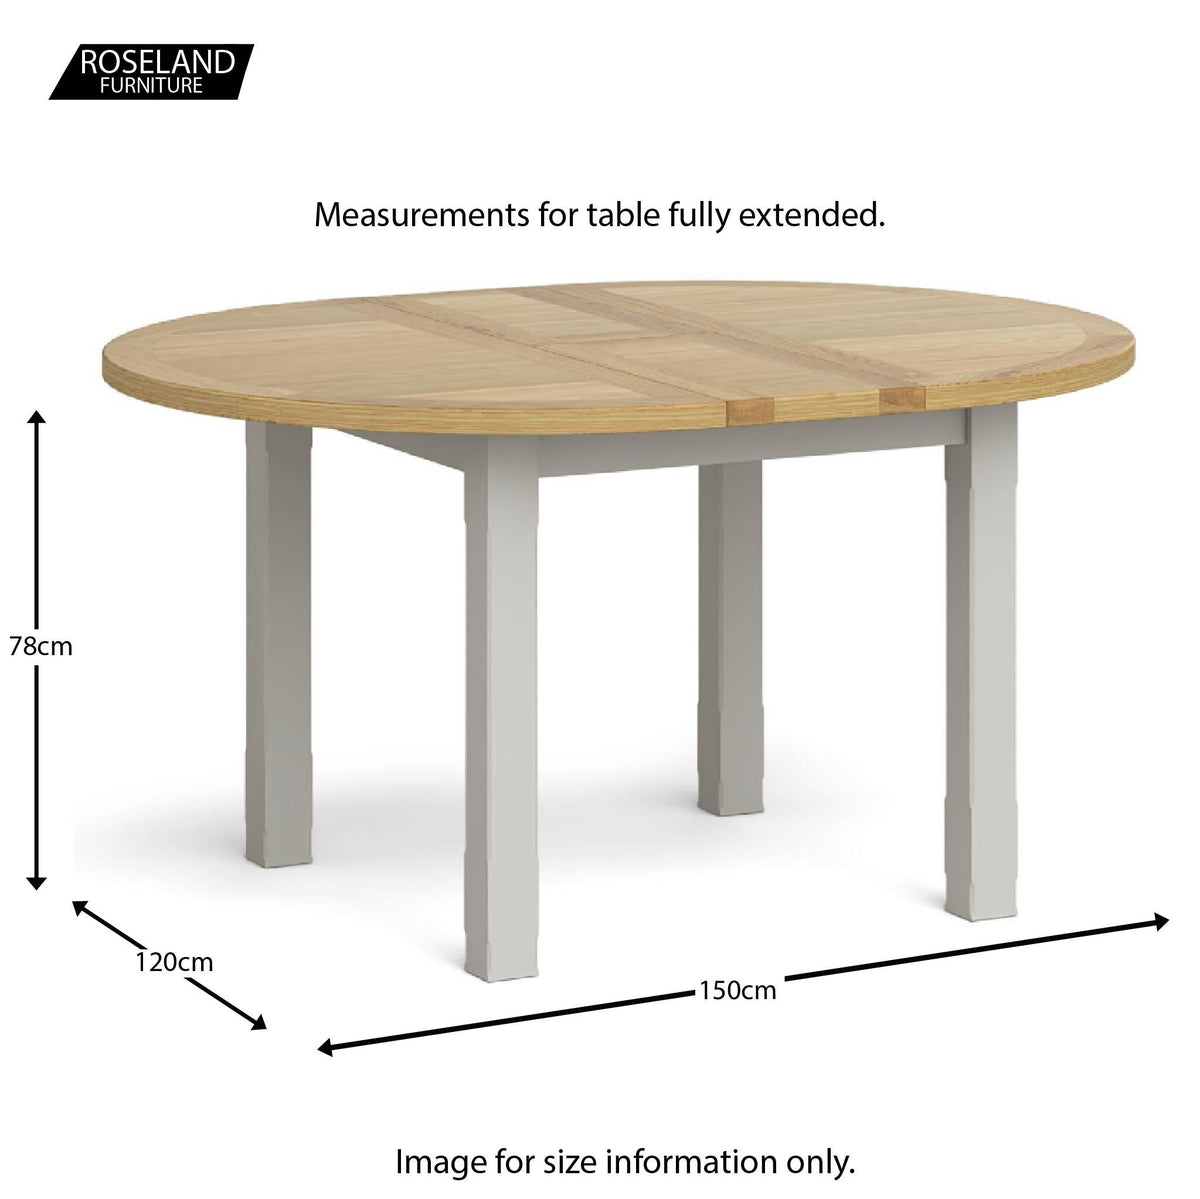 Lundy Grey Round Extending Dining Table - Extended size guide